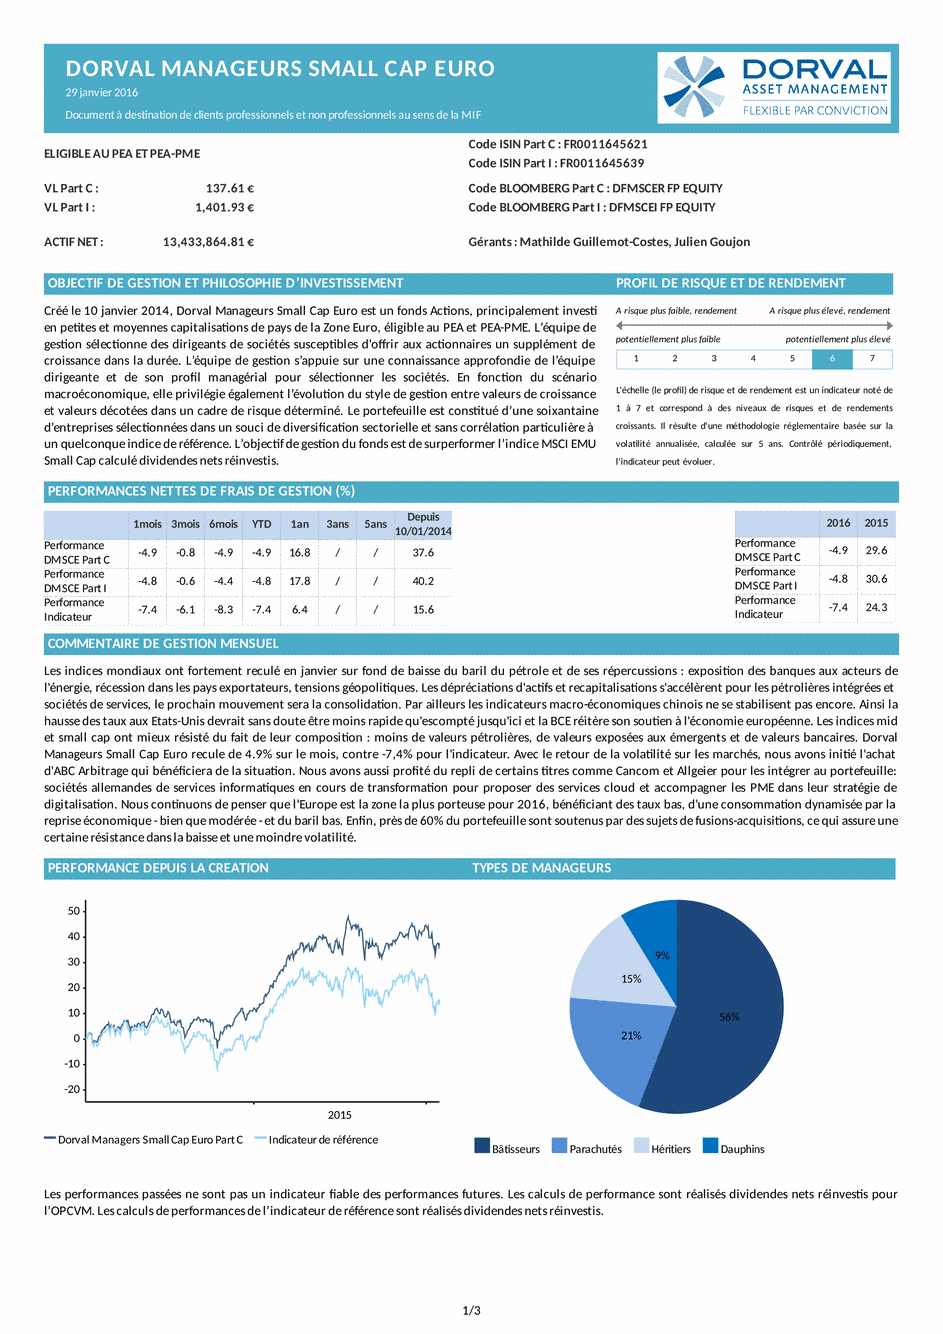 Reporting DORVAL MANAGEURS SMALL CAP EURO - 29/01/2016 - French